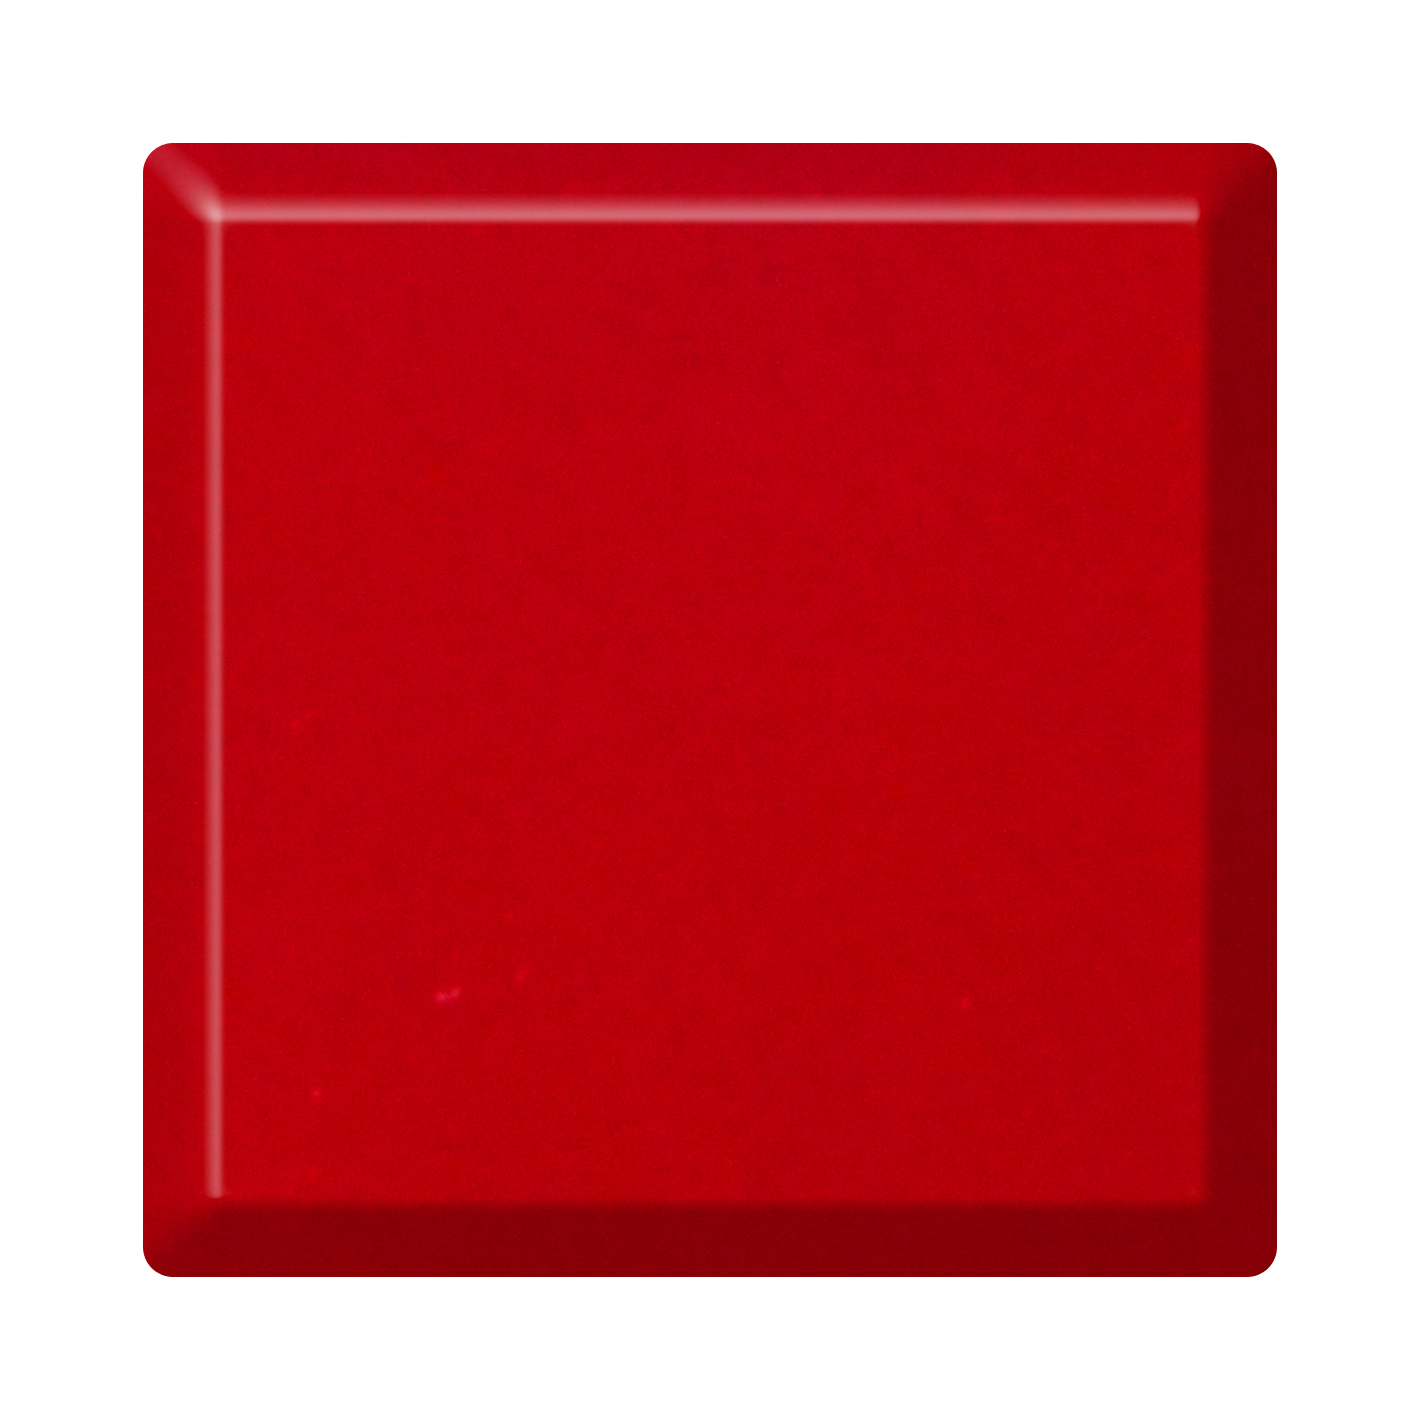 Red acrylic solid surface vanity